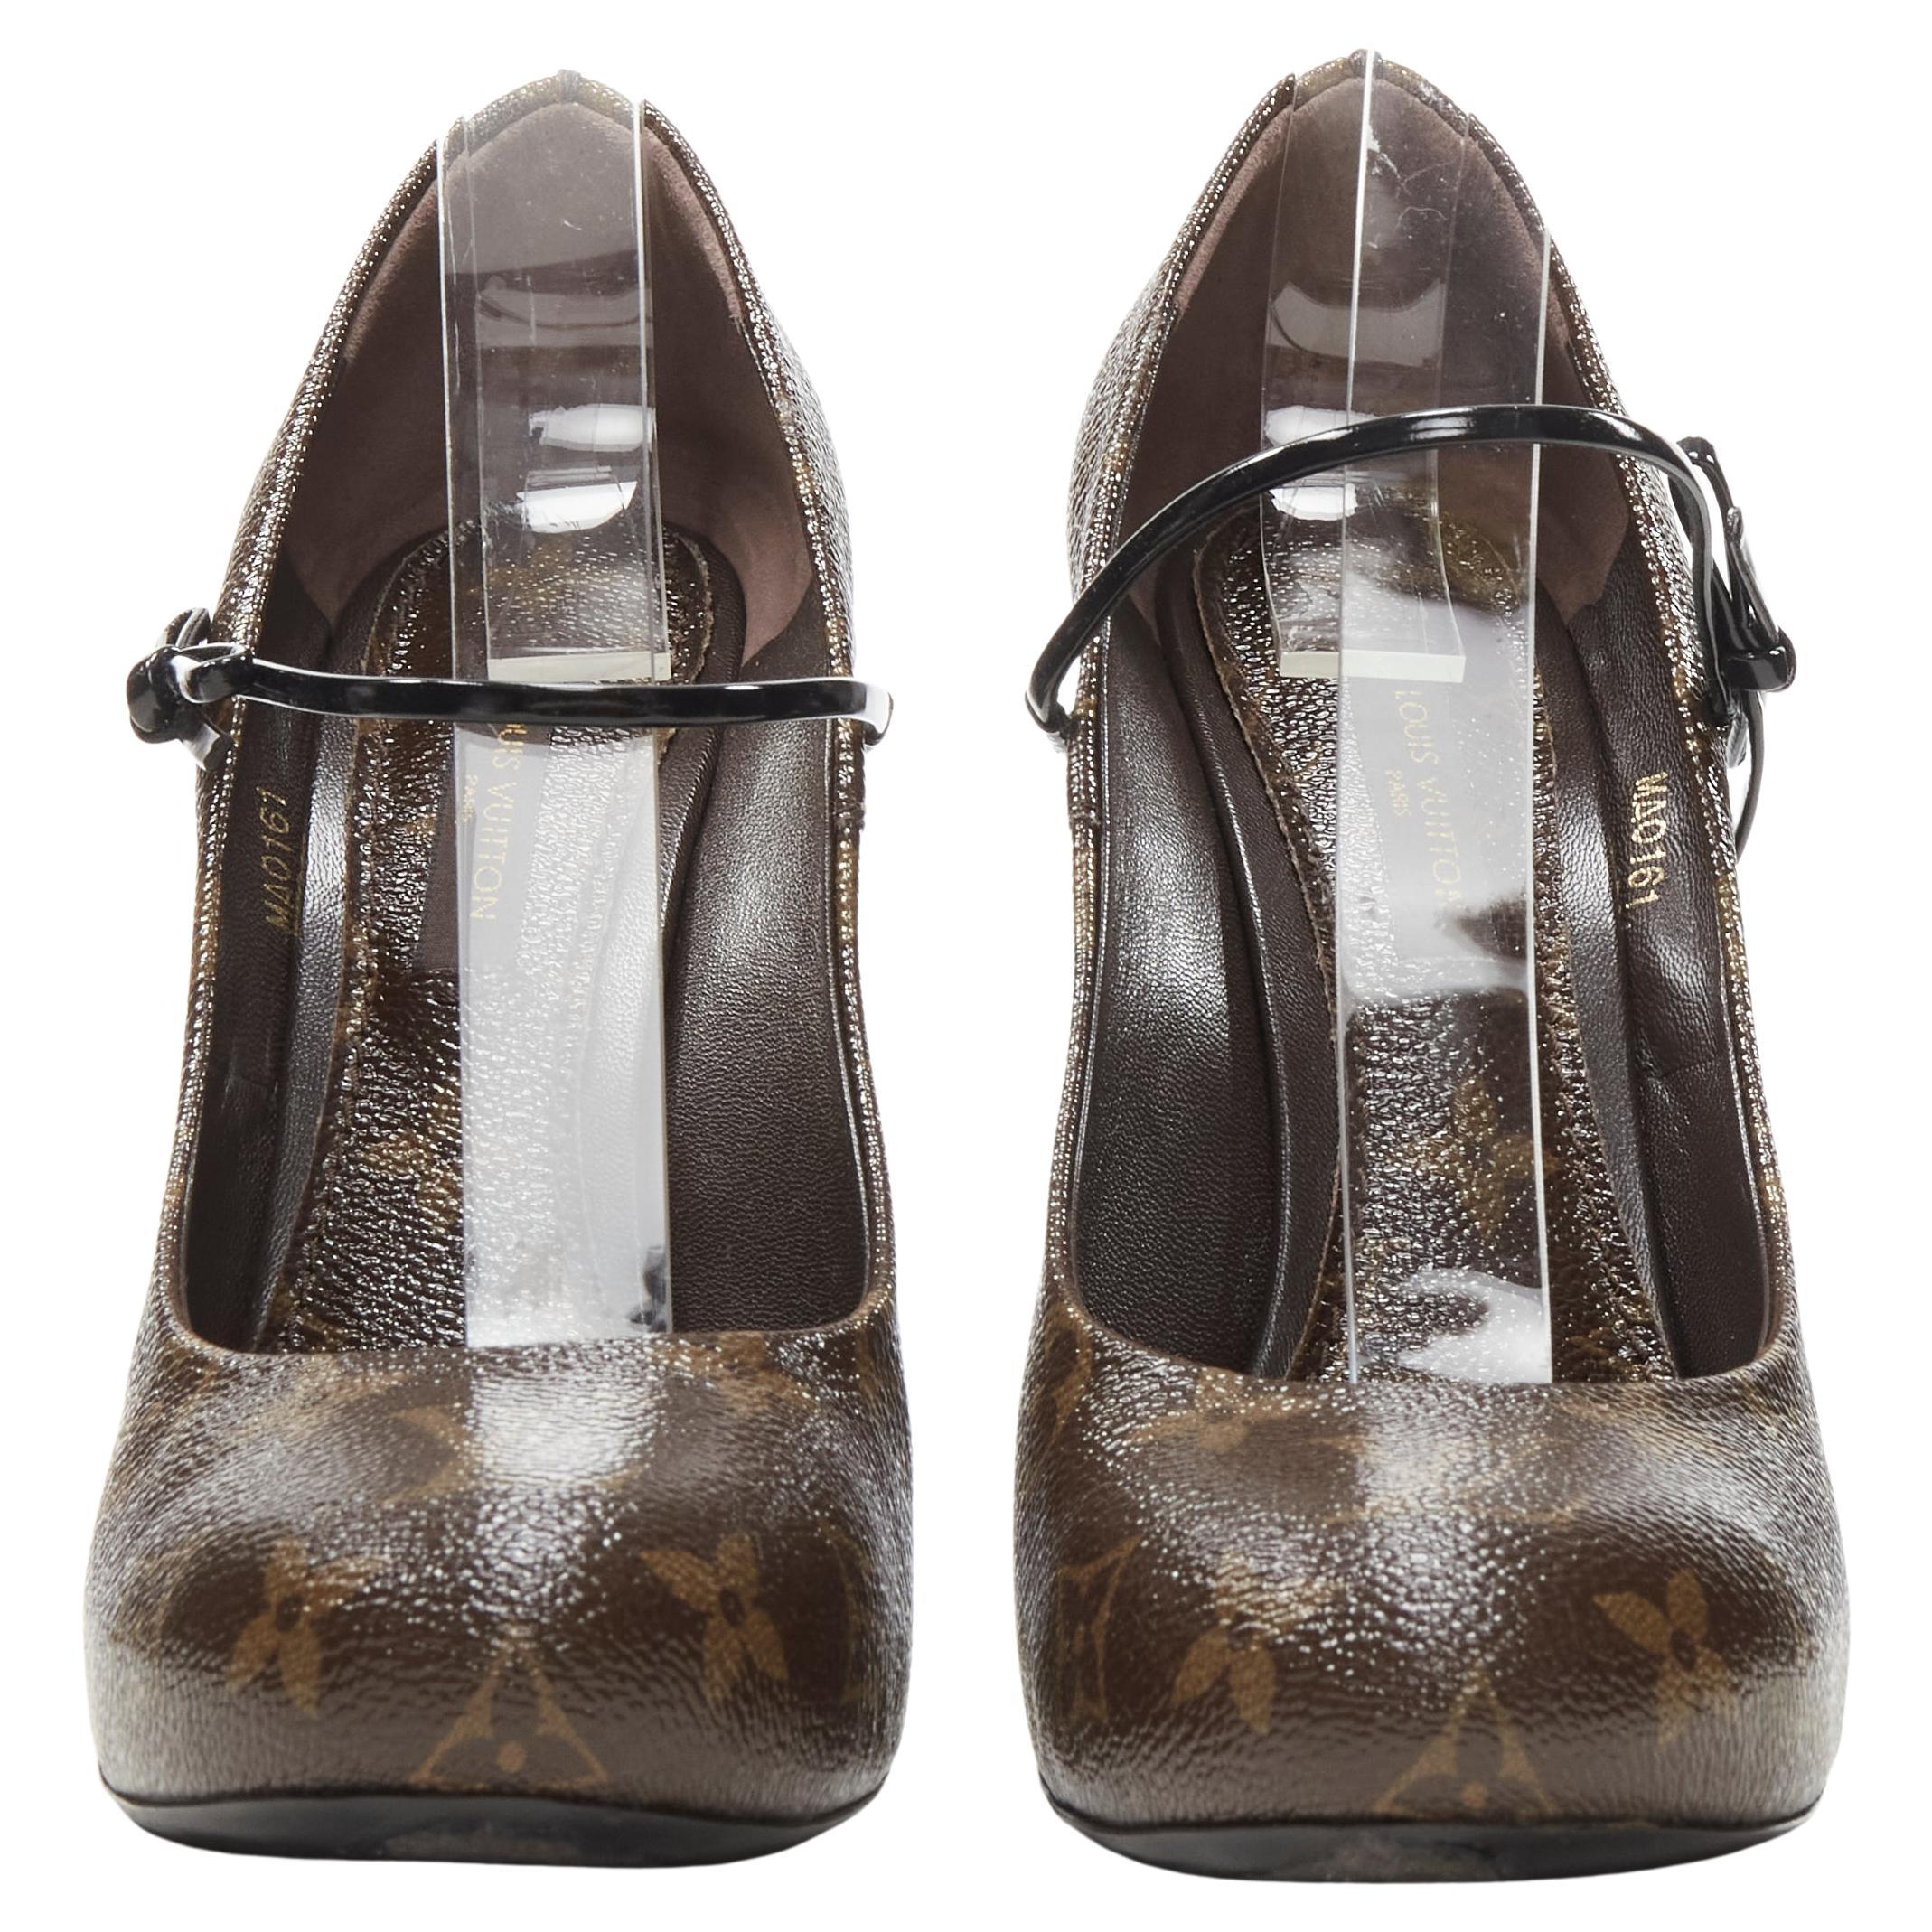 LOUIS VUITTON brown LV monogram bow maryjane chunky heel pump EU36.5
Brand: Louis Vuitton
Material: Canvas
Color: Brown
Pattern: Monogram
Extra Detail: Black patent bow mary jane strap. Chunky heel.
Made in: Italy

CONDITION:
Condition: Excellent,